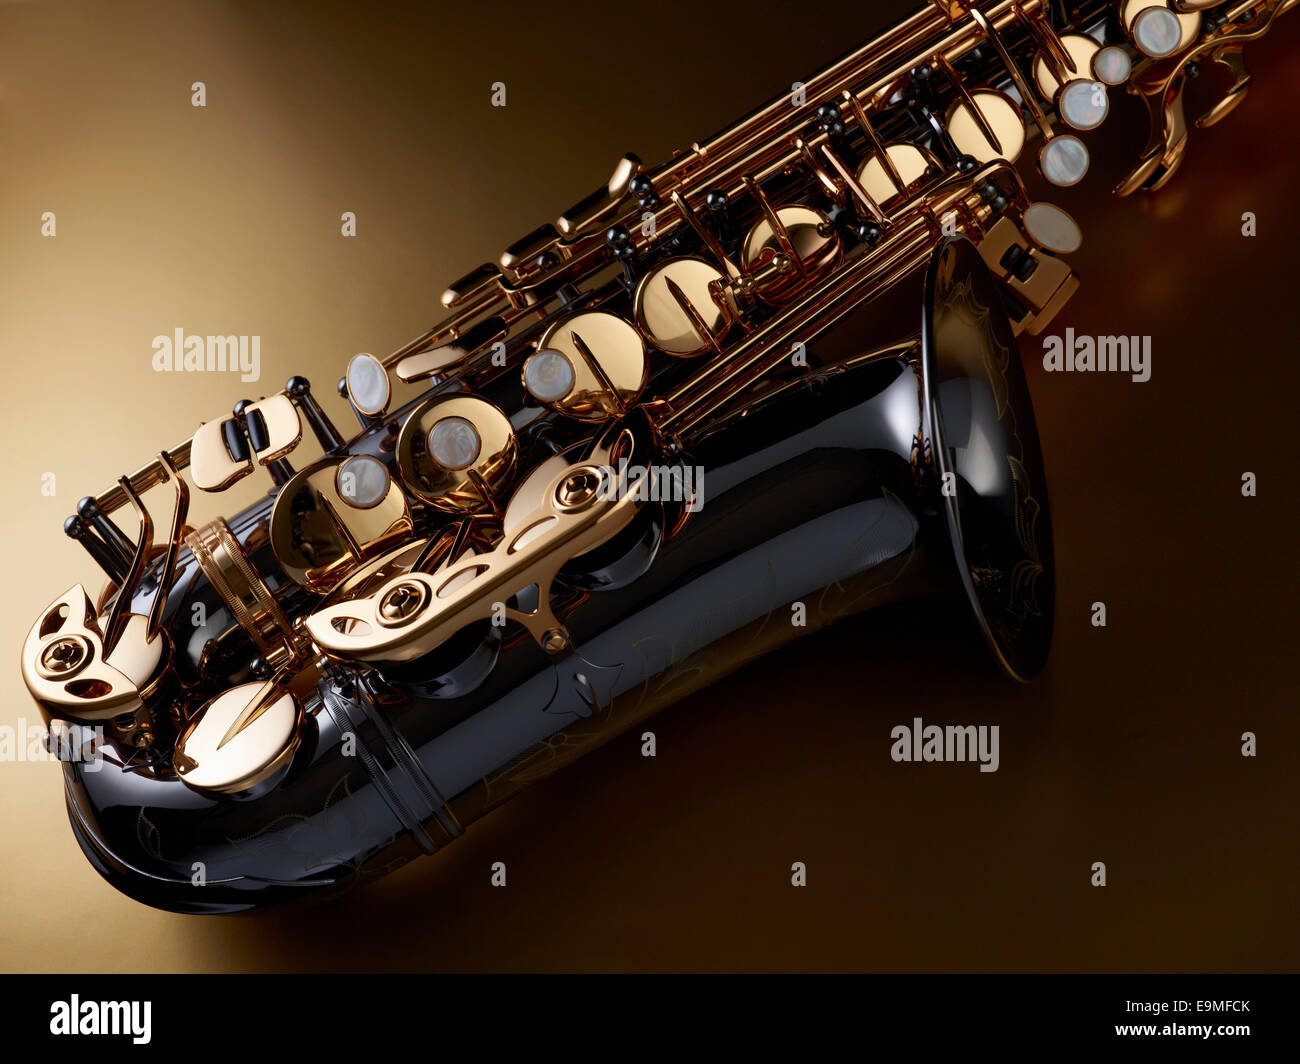 High angle view of saxophone against colored background Stock Photo